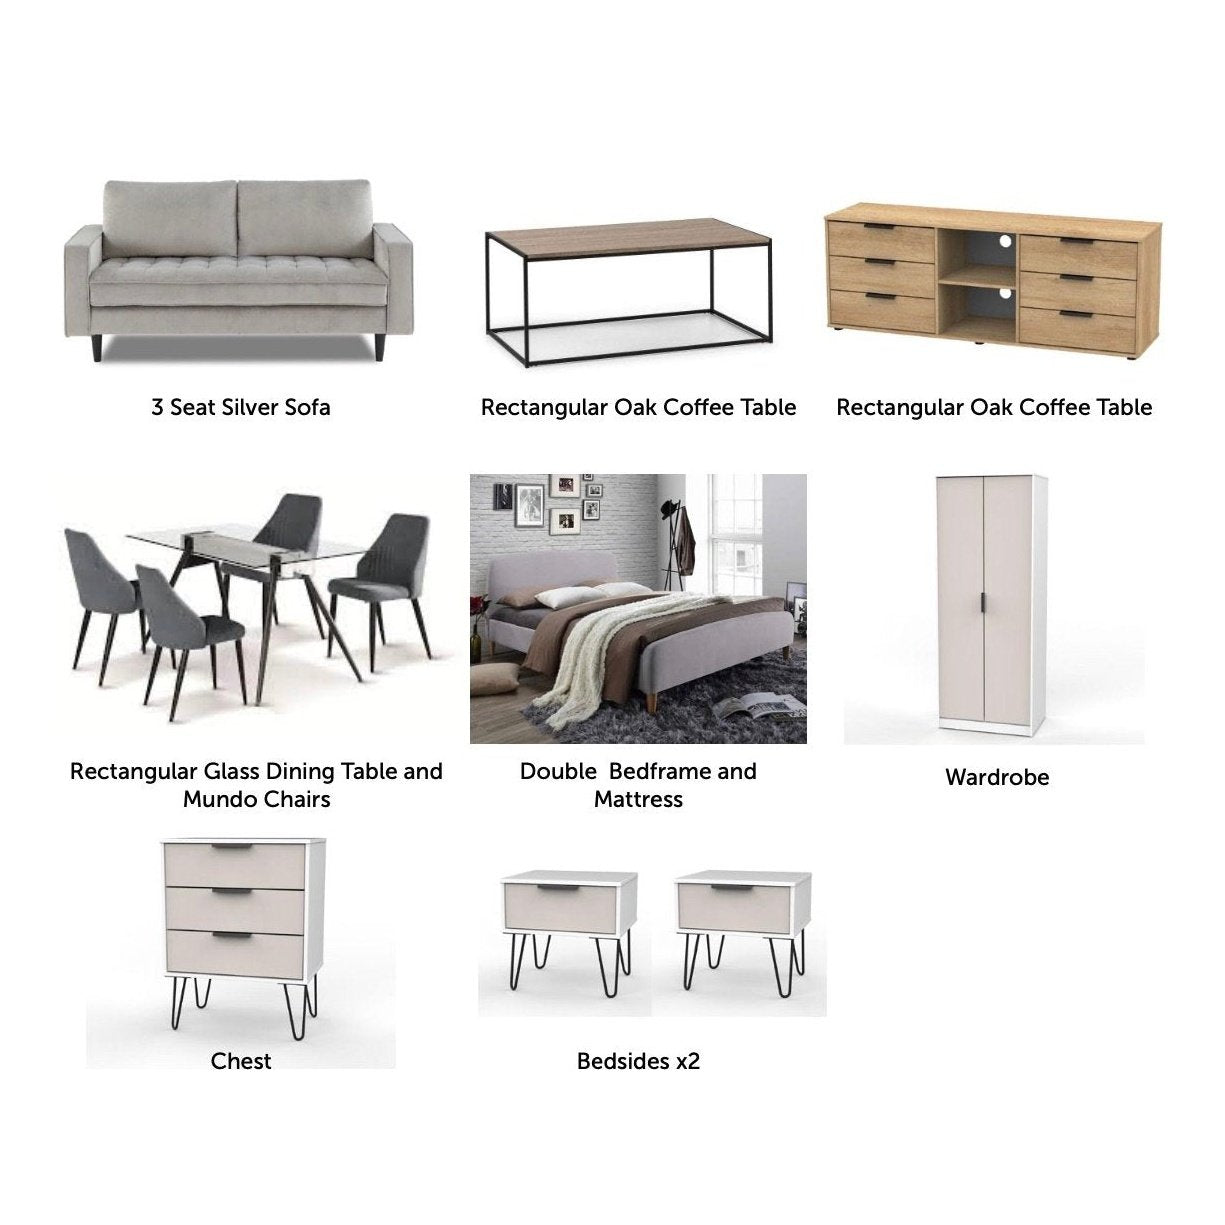 Oakwood furniture package products | Manor Interiors